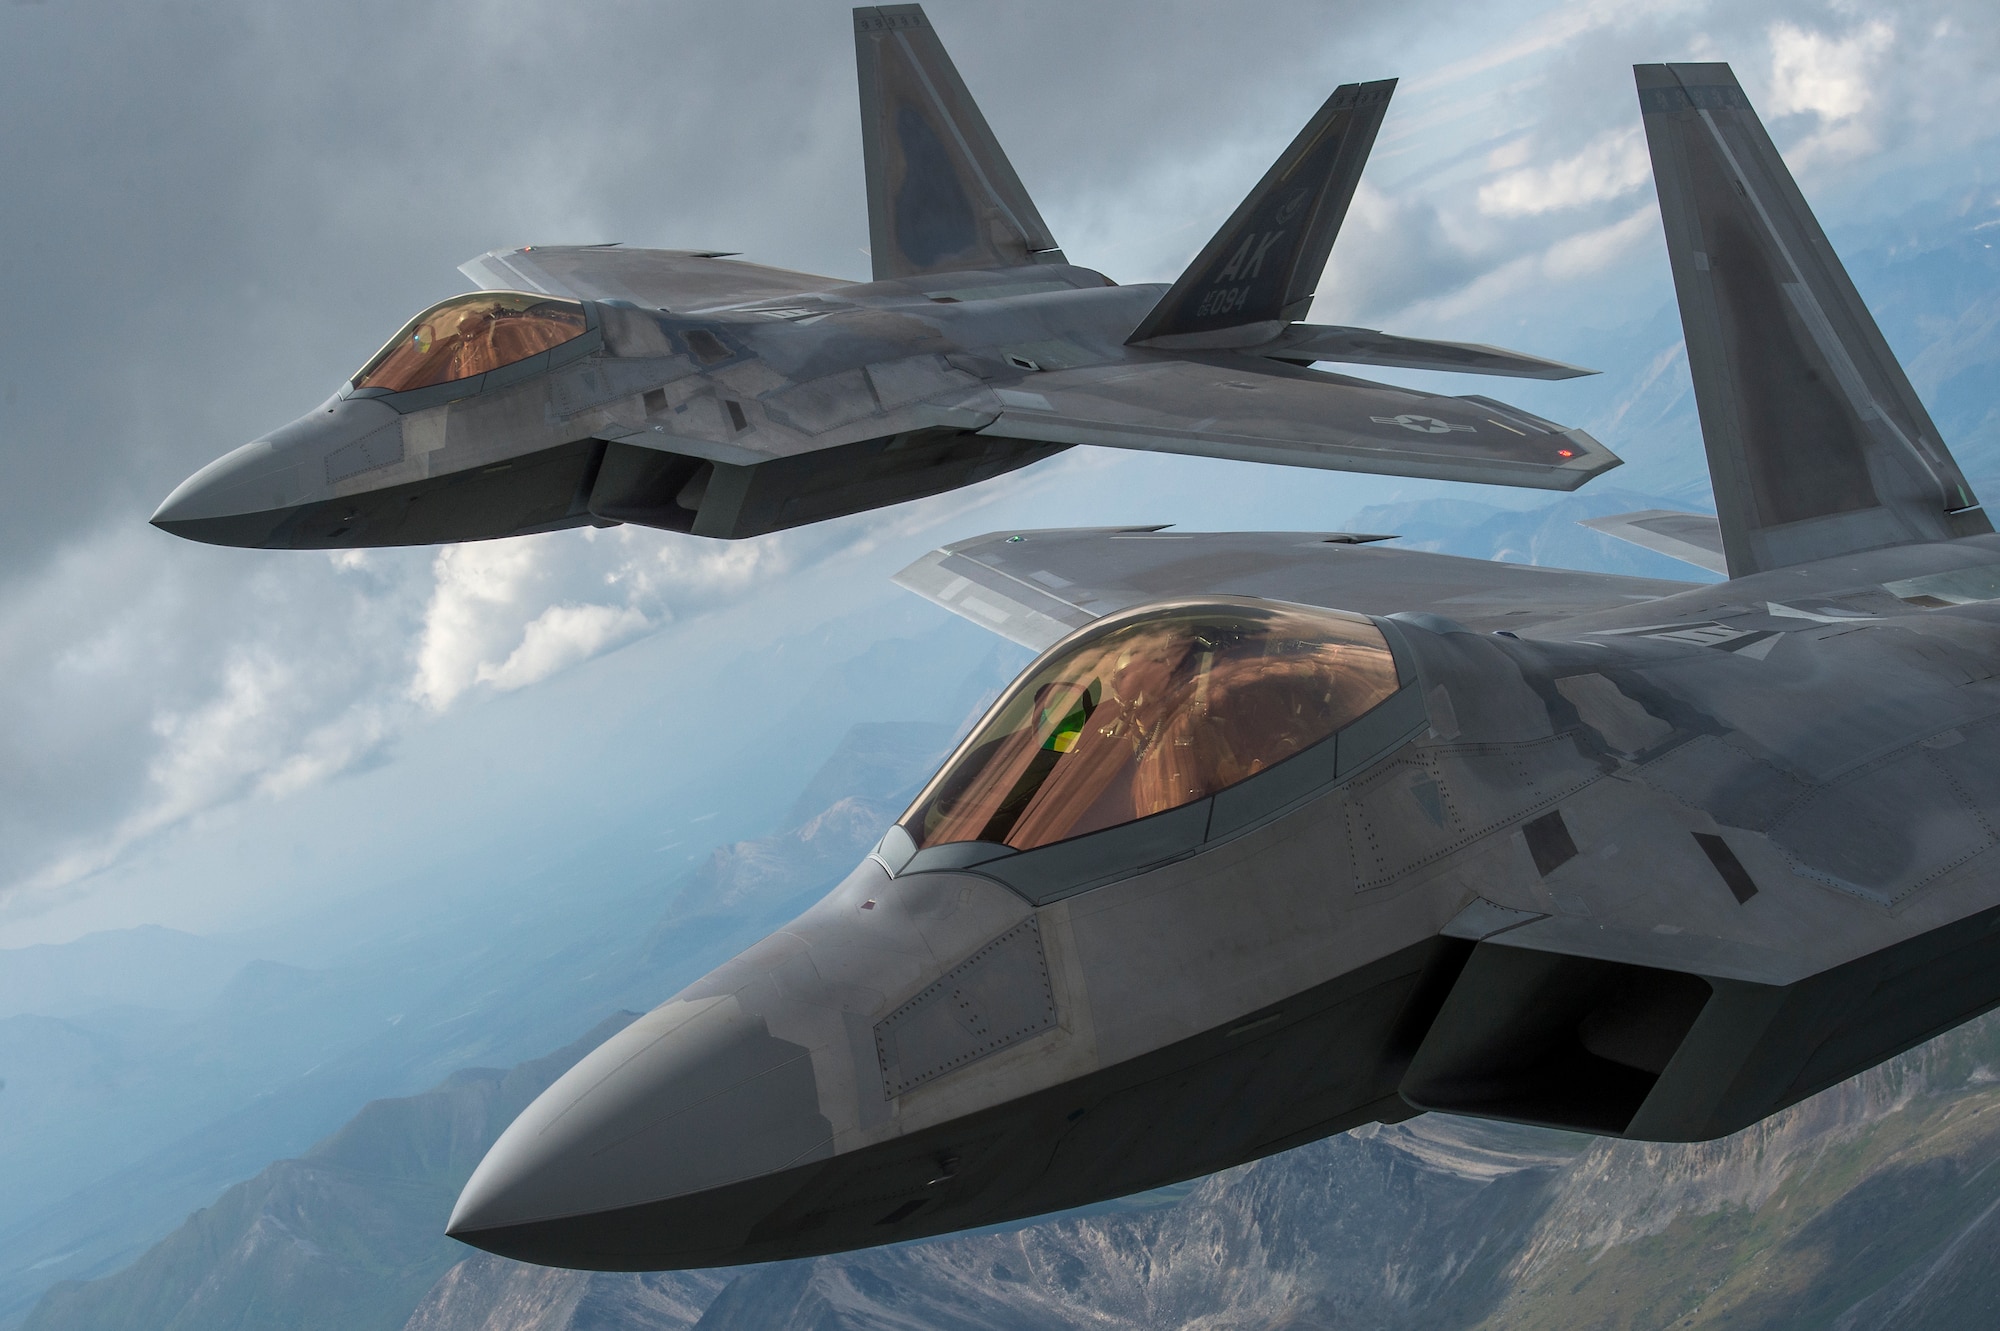 U.S. Air Force F-22 Raptors from Joint Base Elmendorf-Richardson, fly in formation over the Joint Pacific Alaska Range Complex, July 18, 2019.